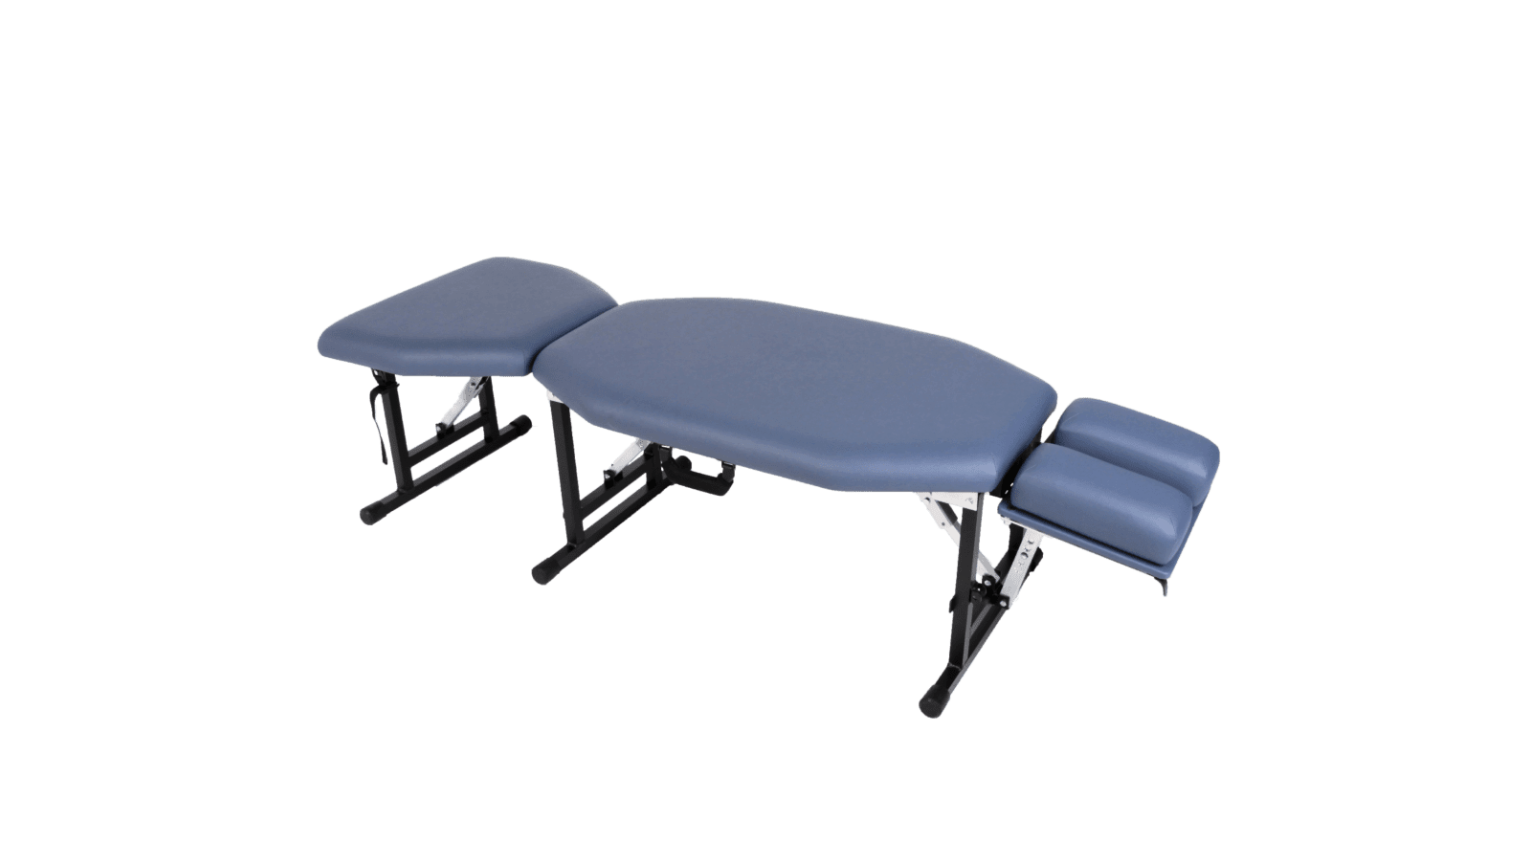 Blue Lifetimer International LT-50 portable chiropractic adjustment drop treatment table also for physical therapy and massage